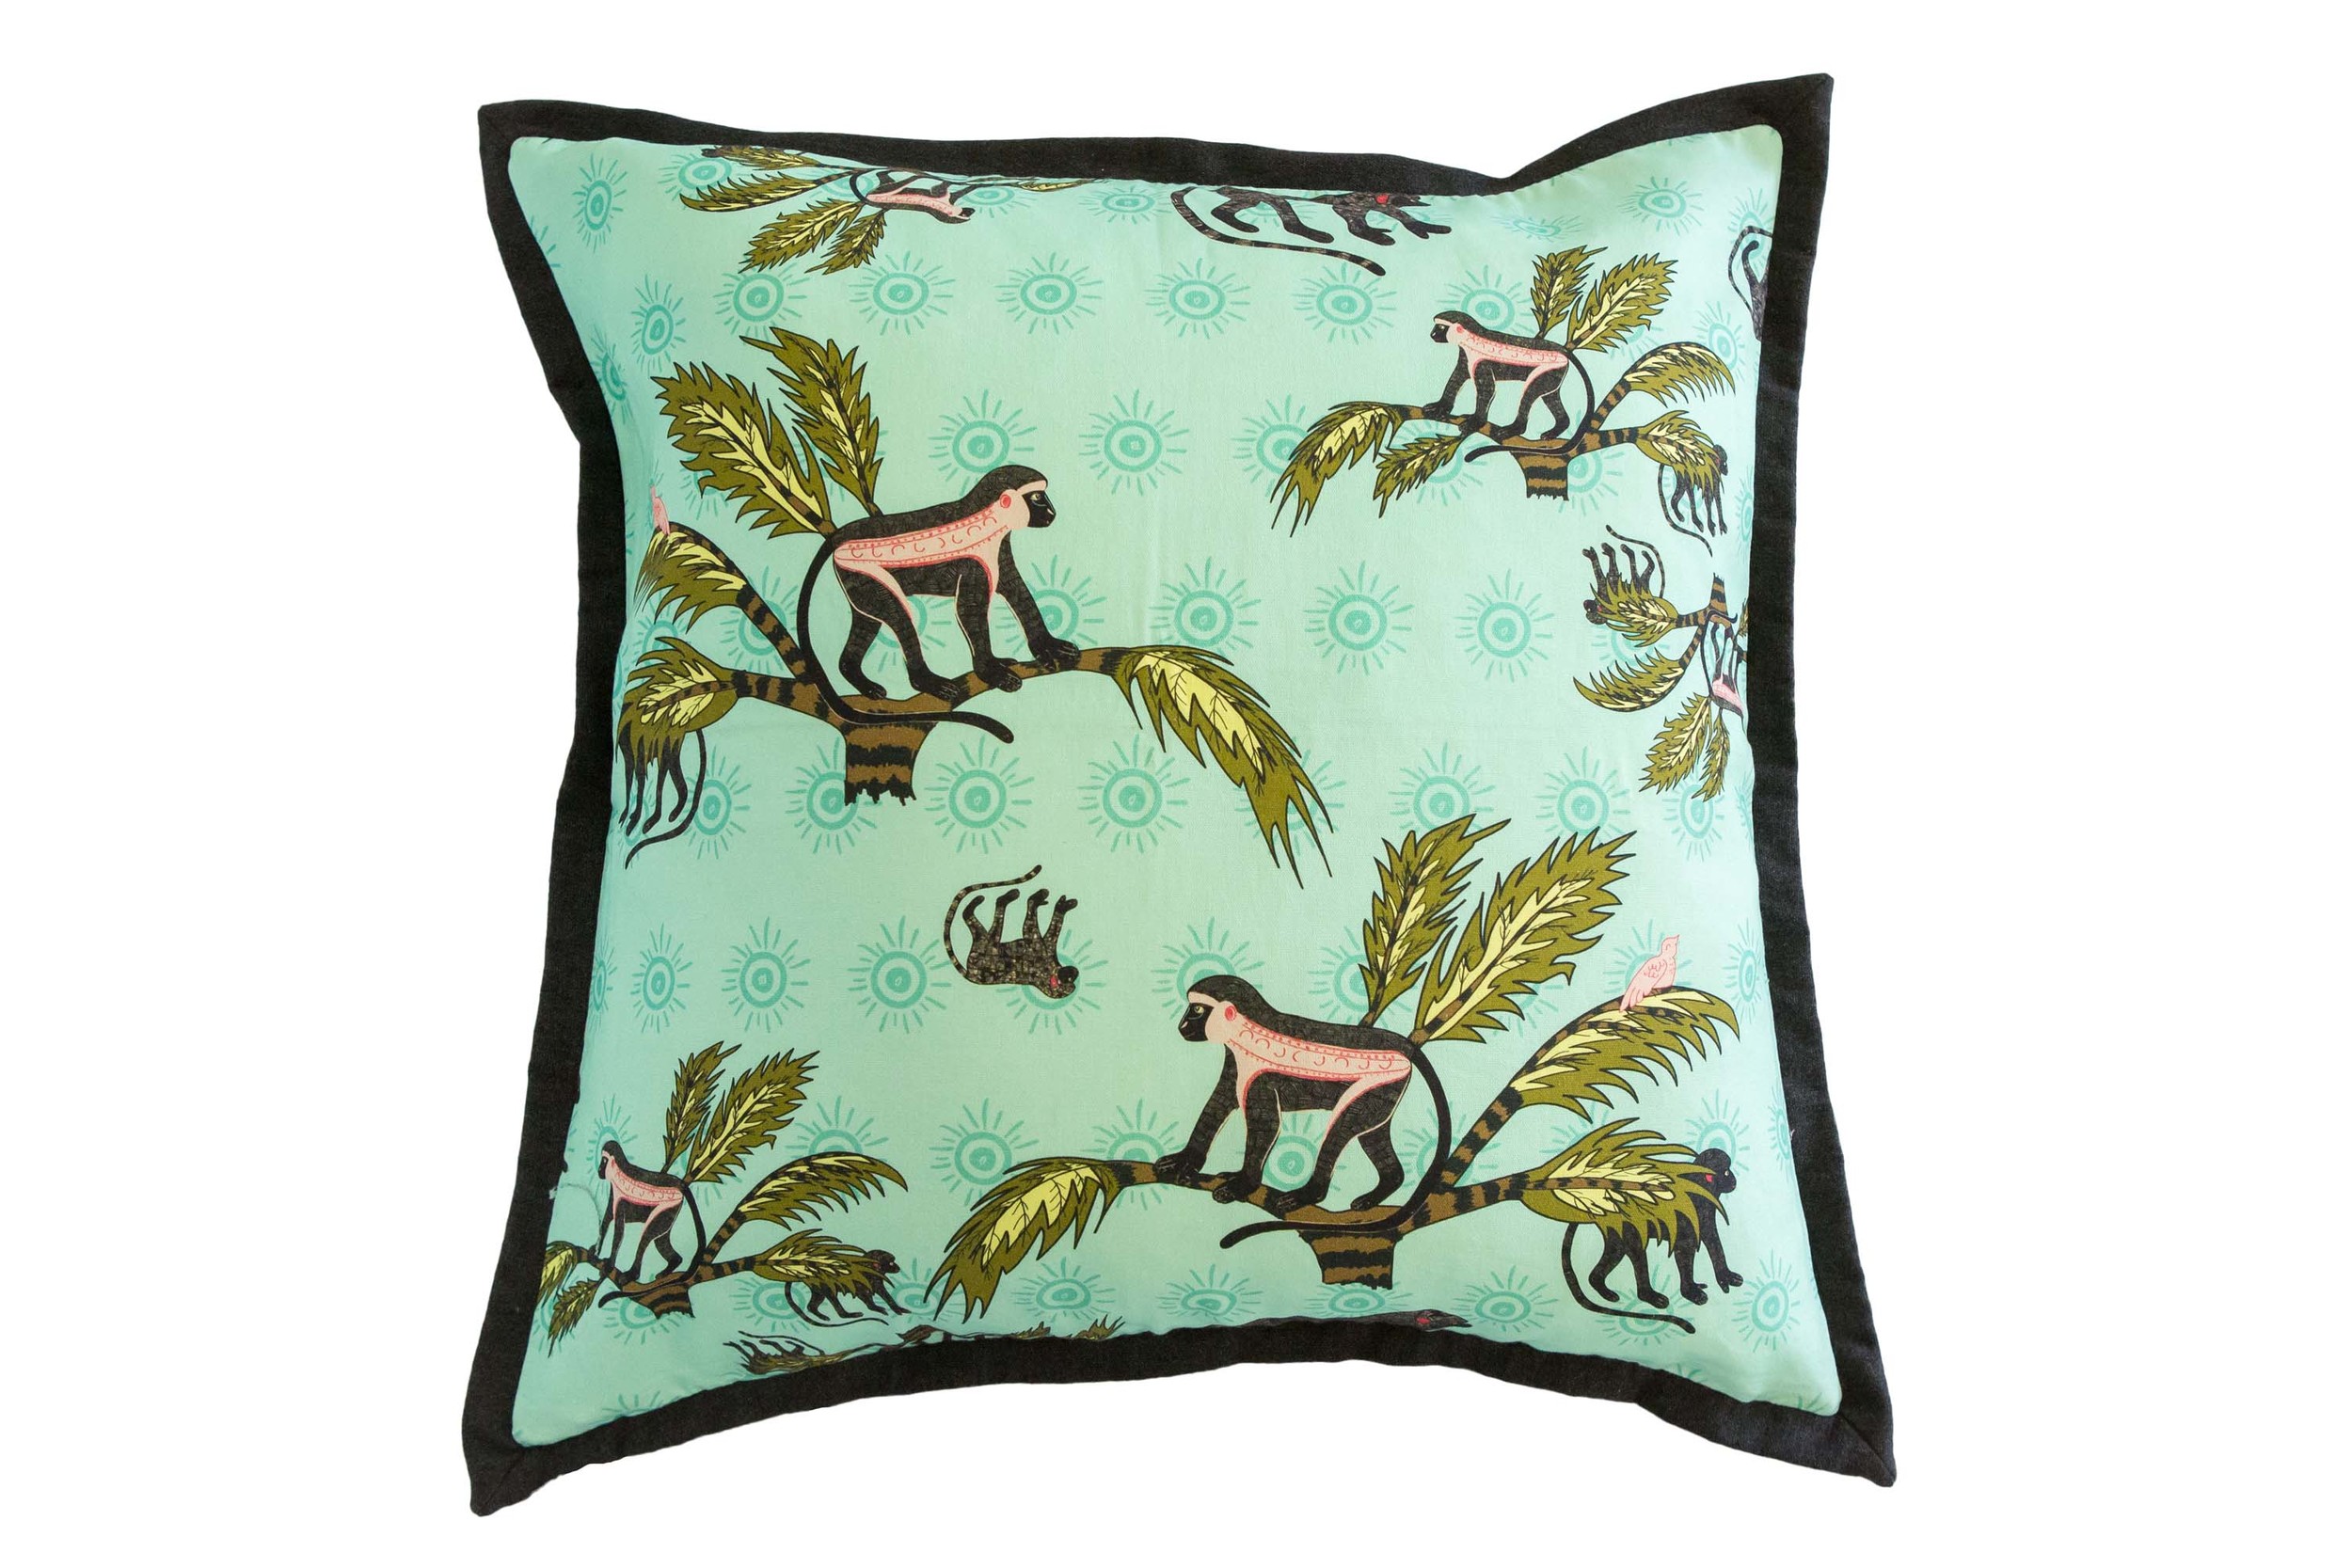 Monkey Palm Oasis cushion by Halsted